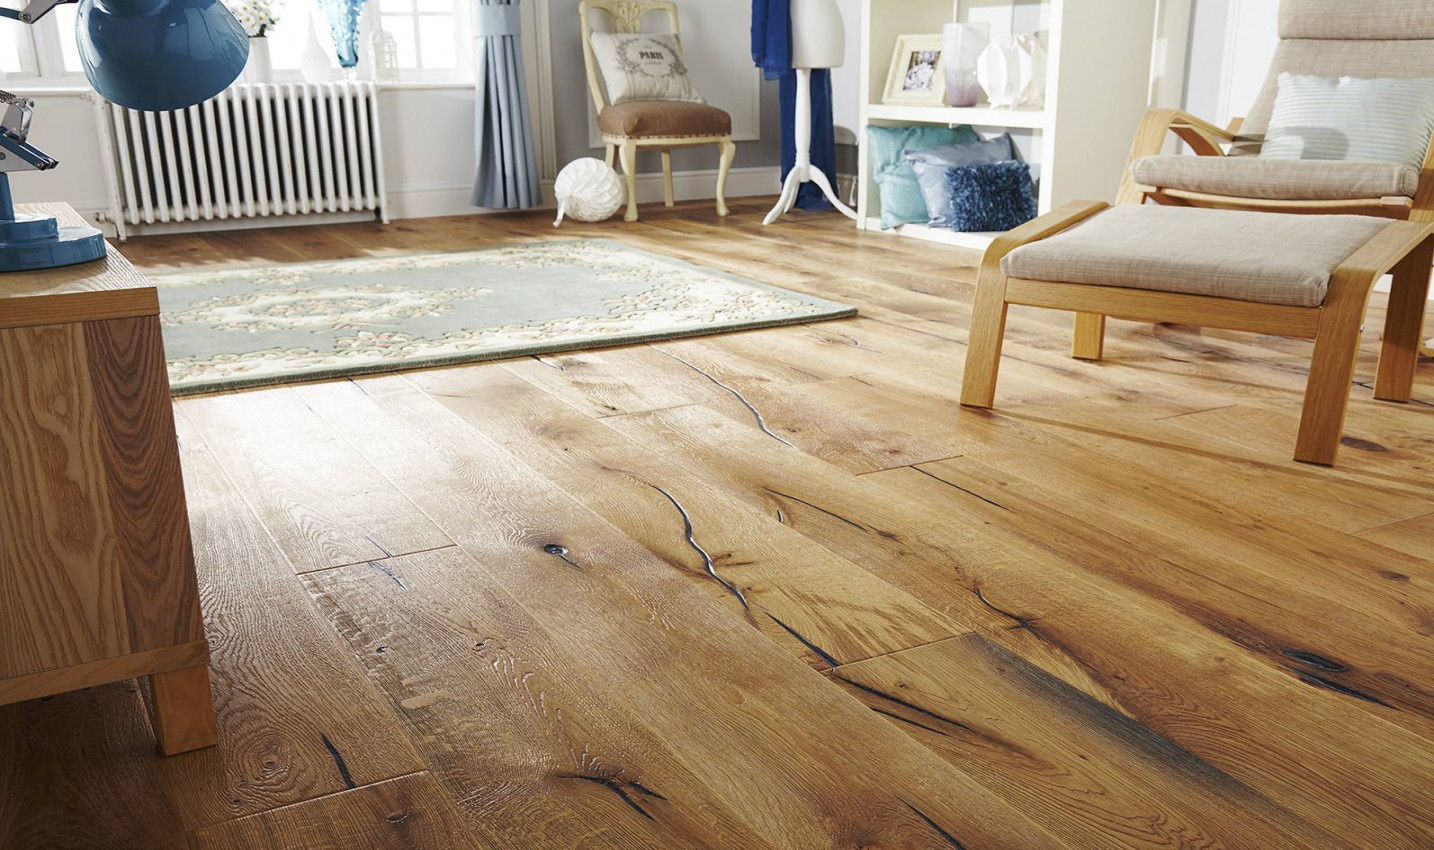 Value Carpets & Flooring - Is real wood flooring easy to scratch?